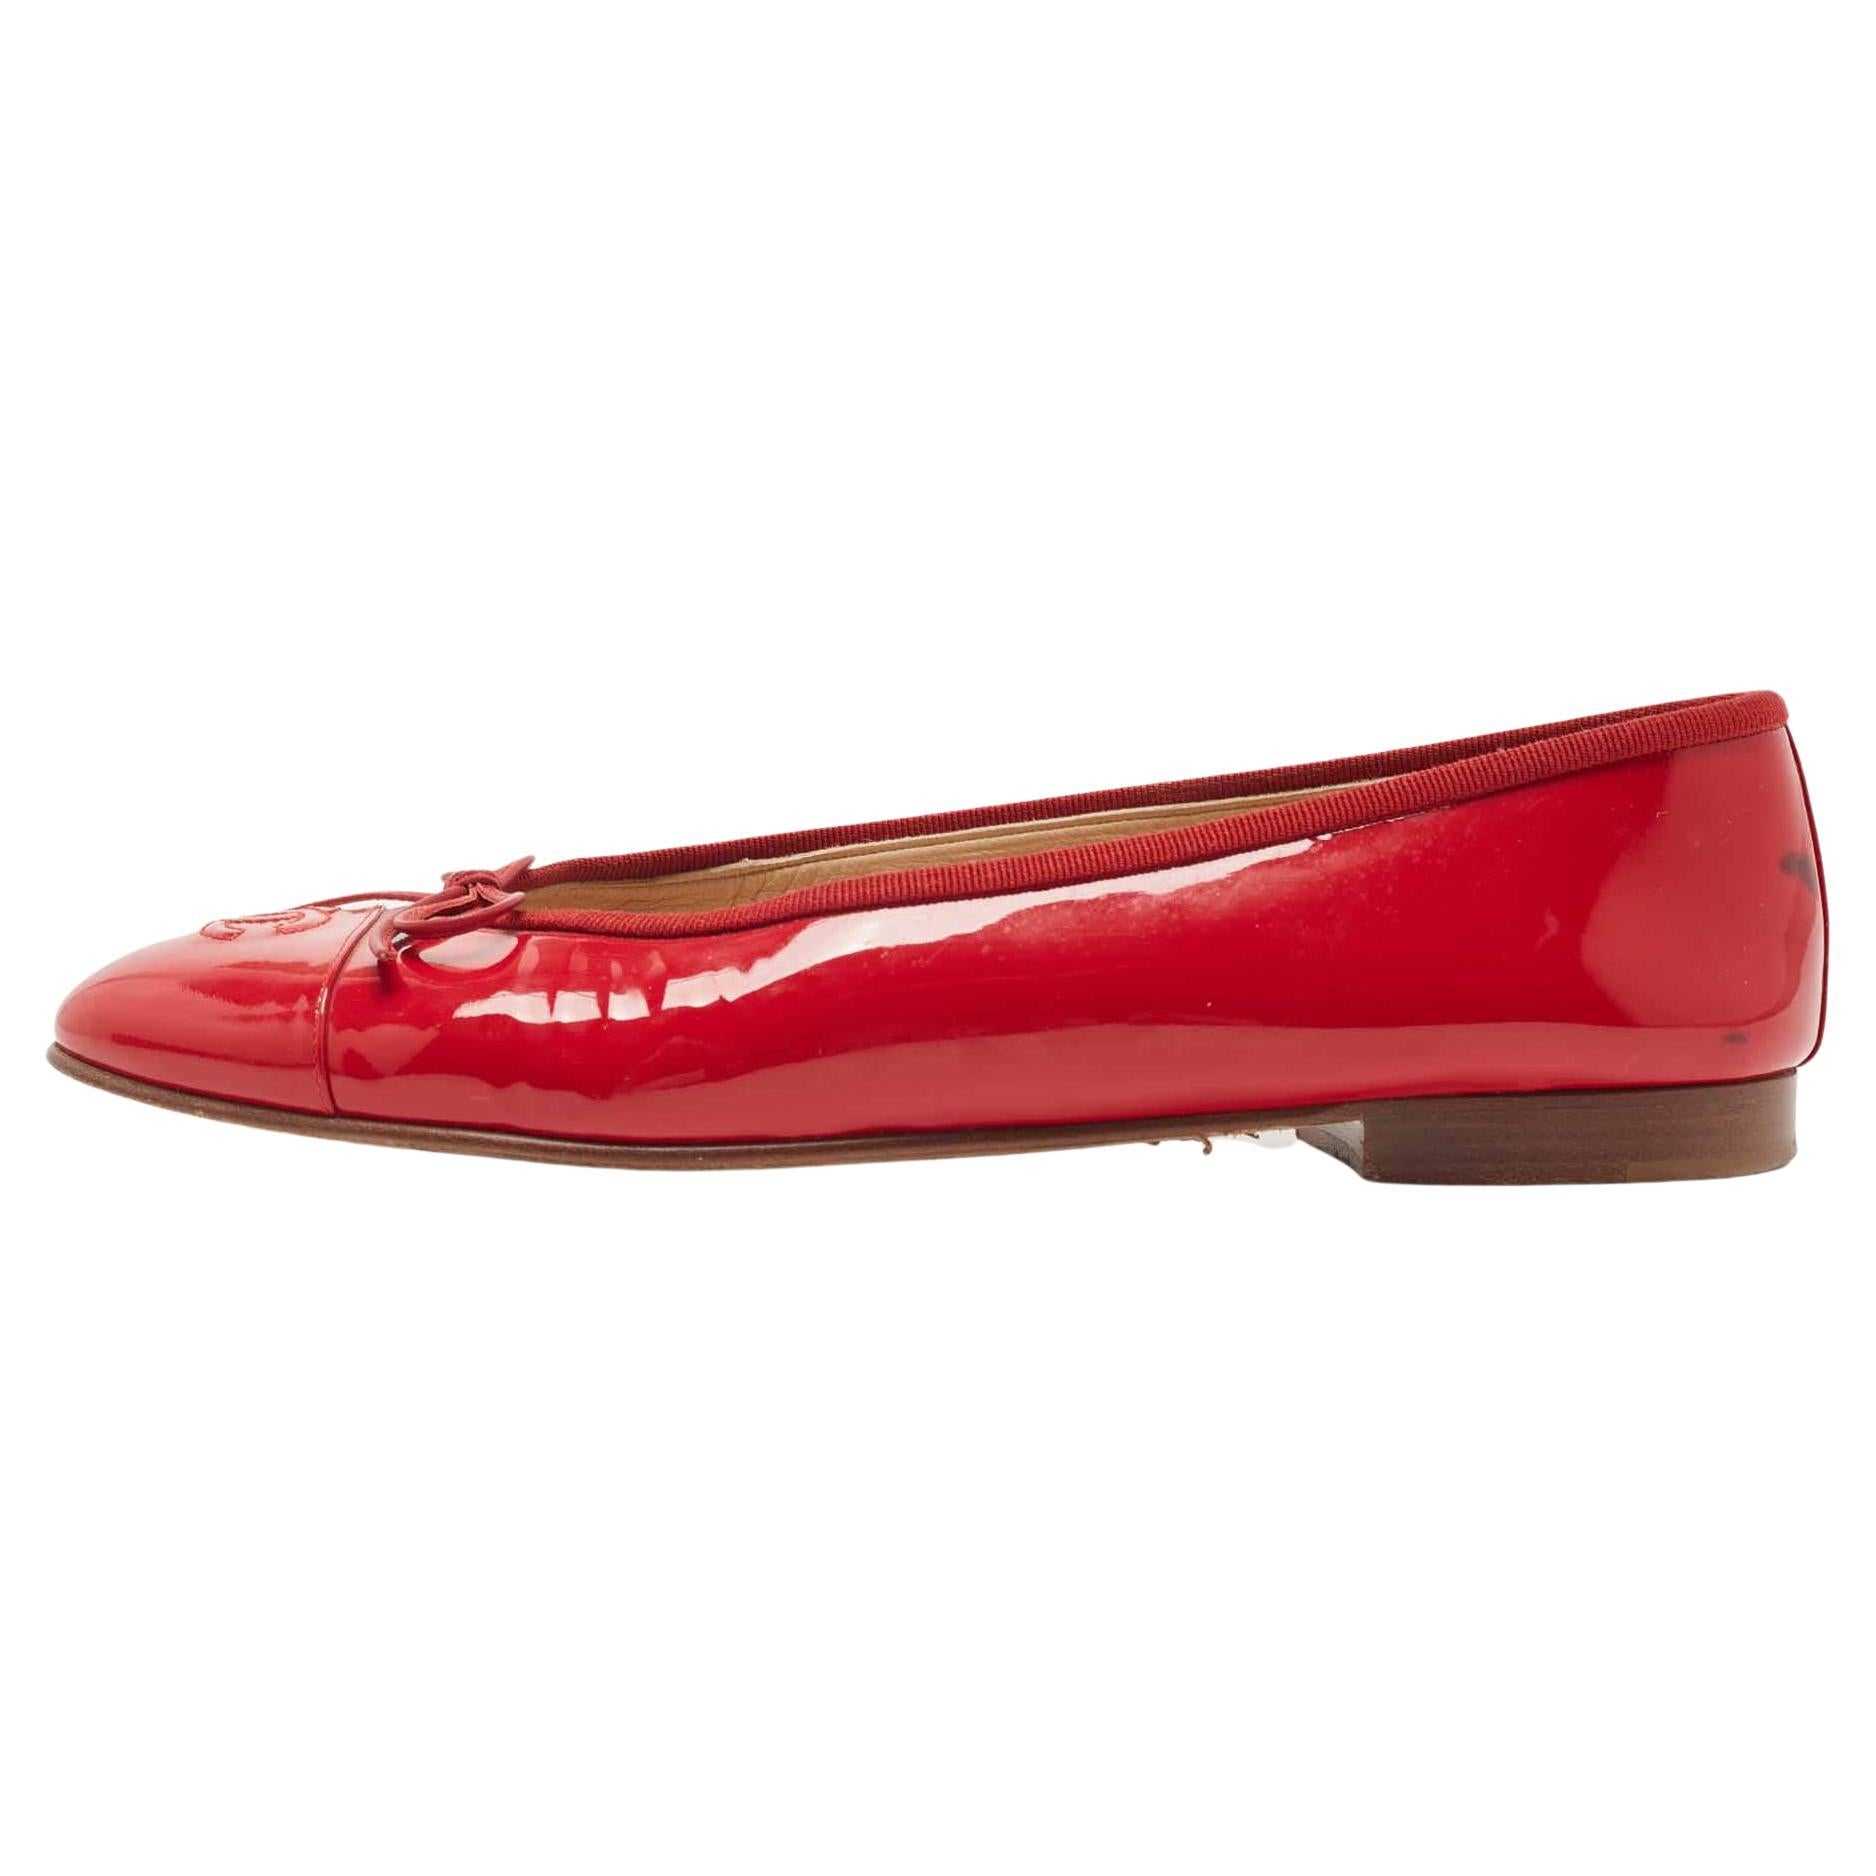 Cambon patent leather ballet flats Chanel Red size 39.5 EU in